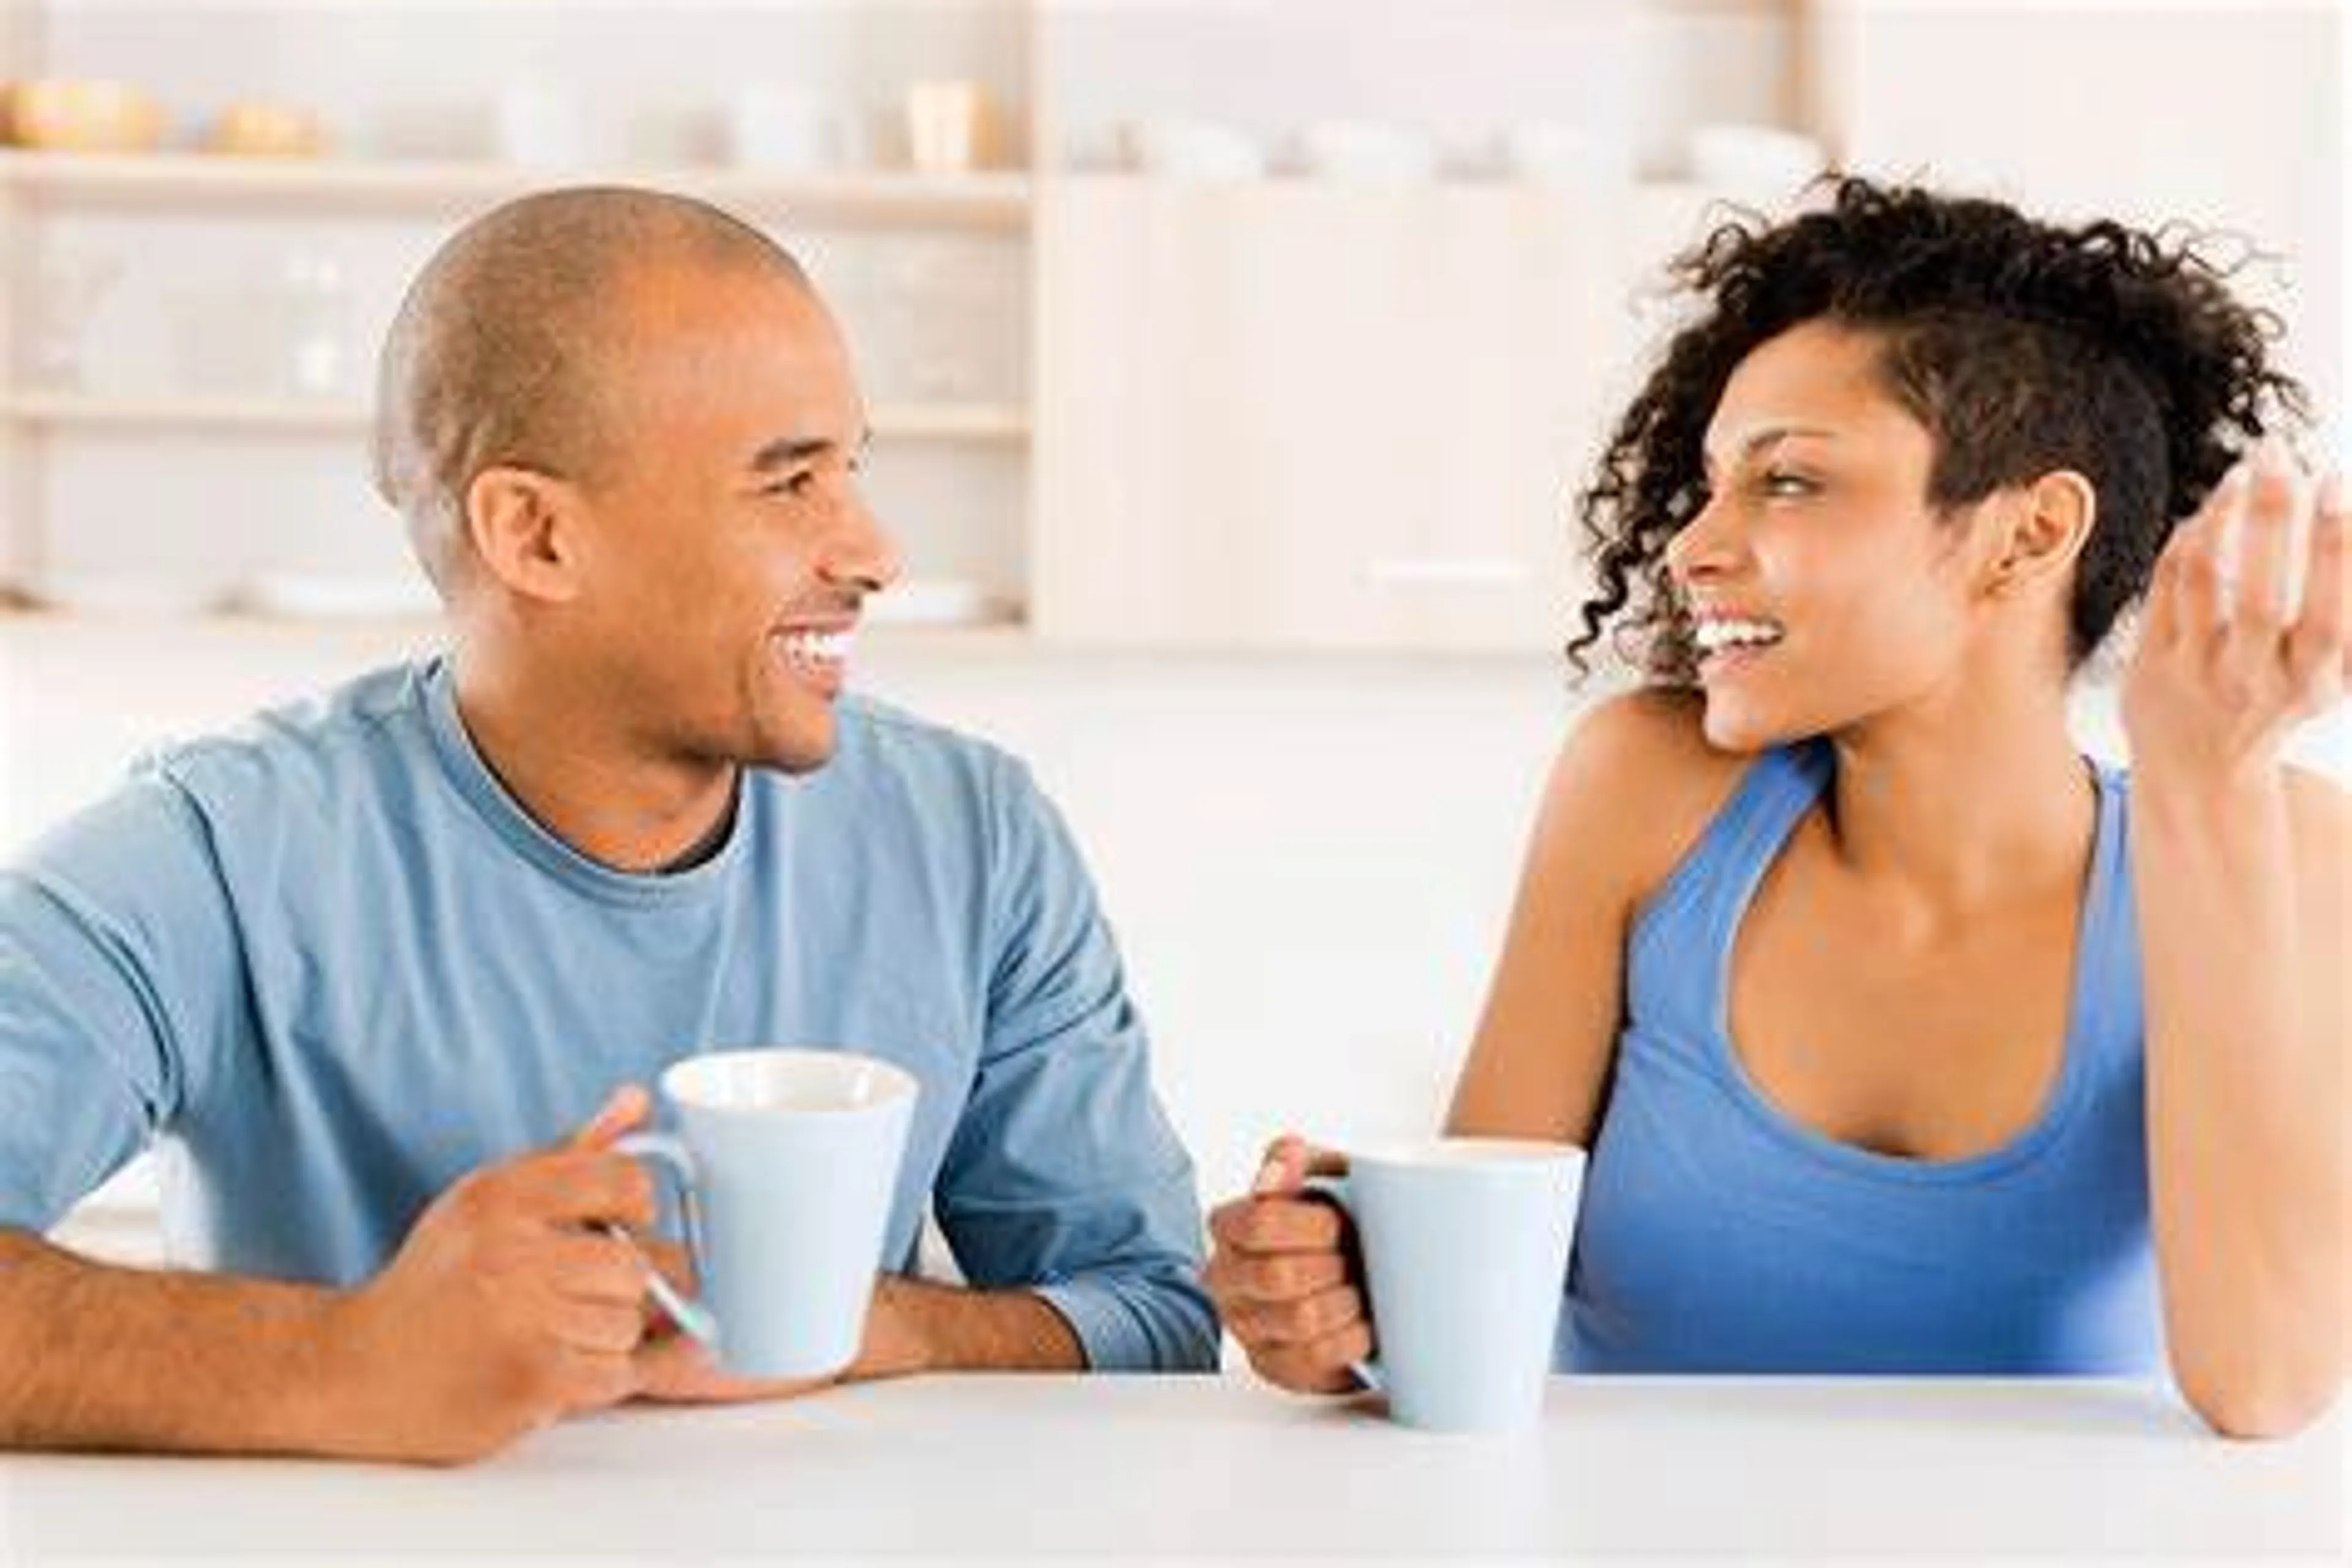 Healthy Relationships and Communication